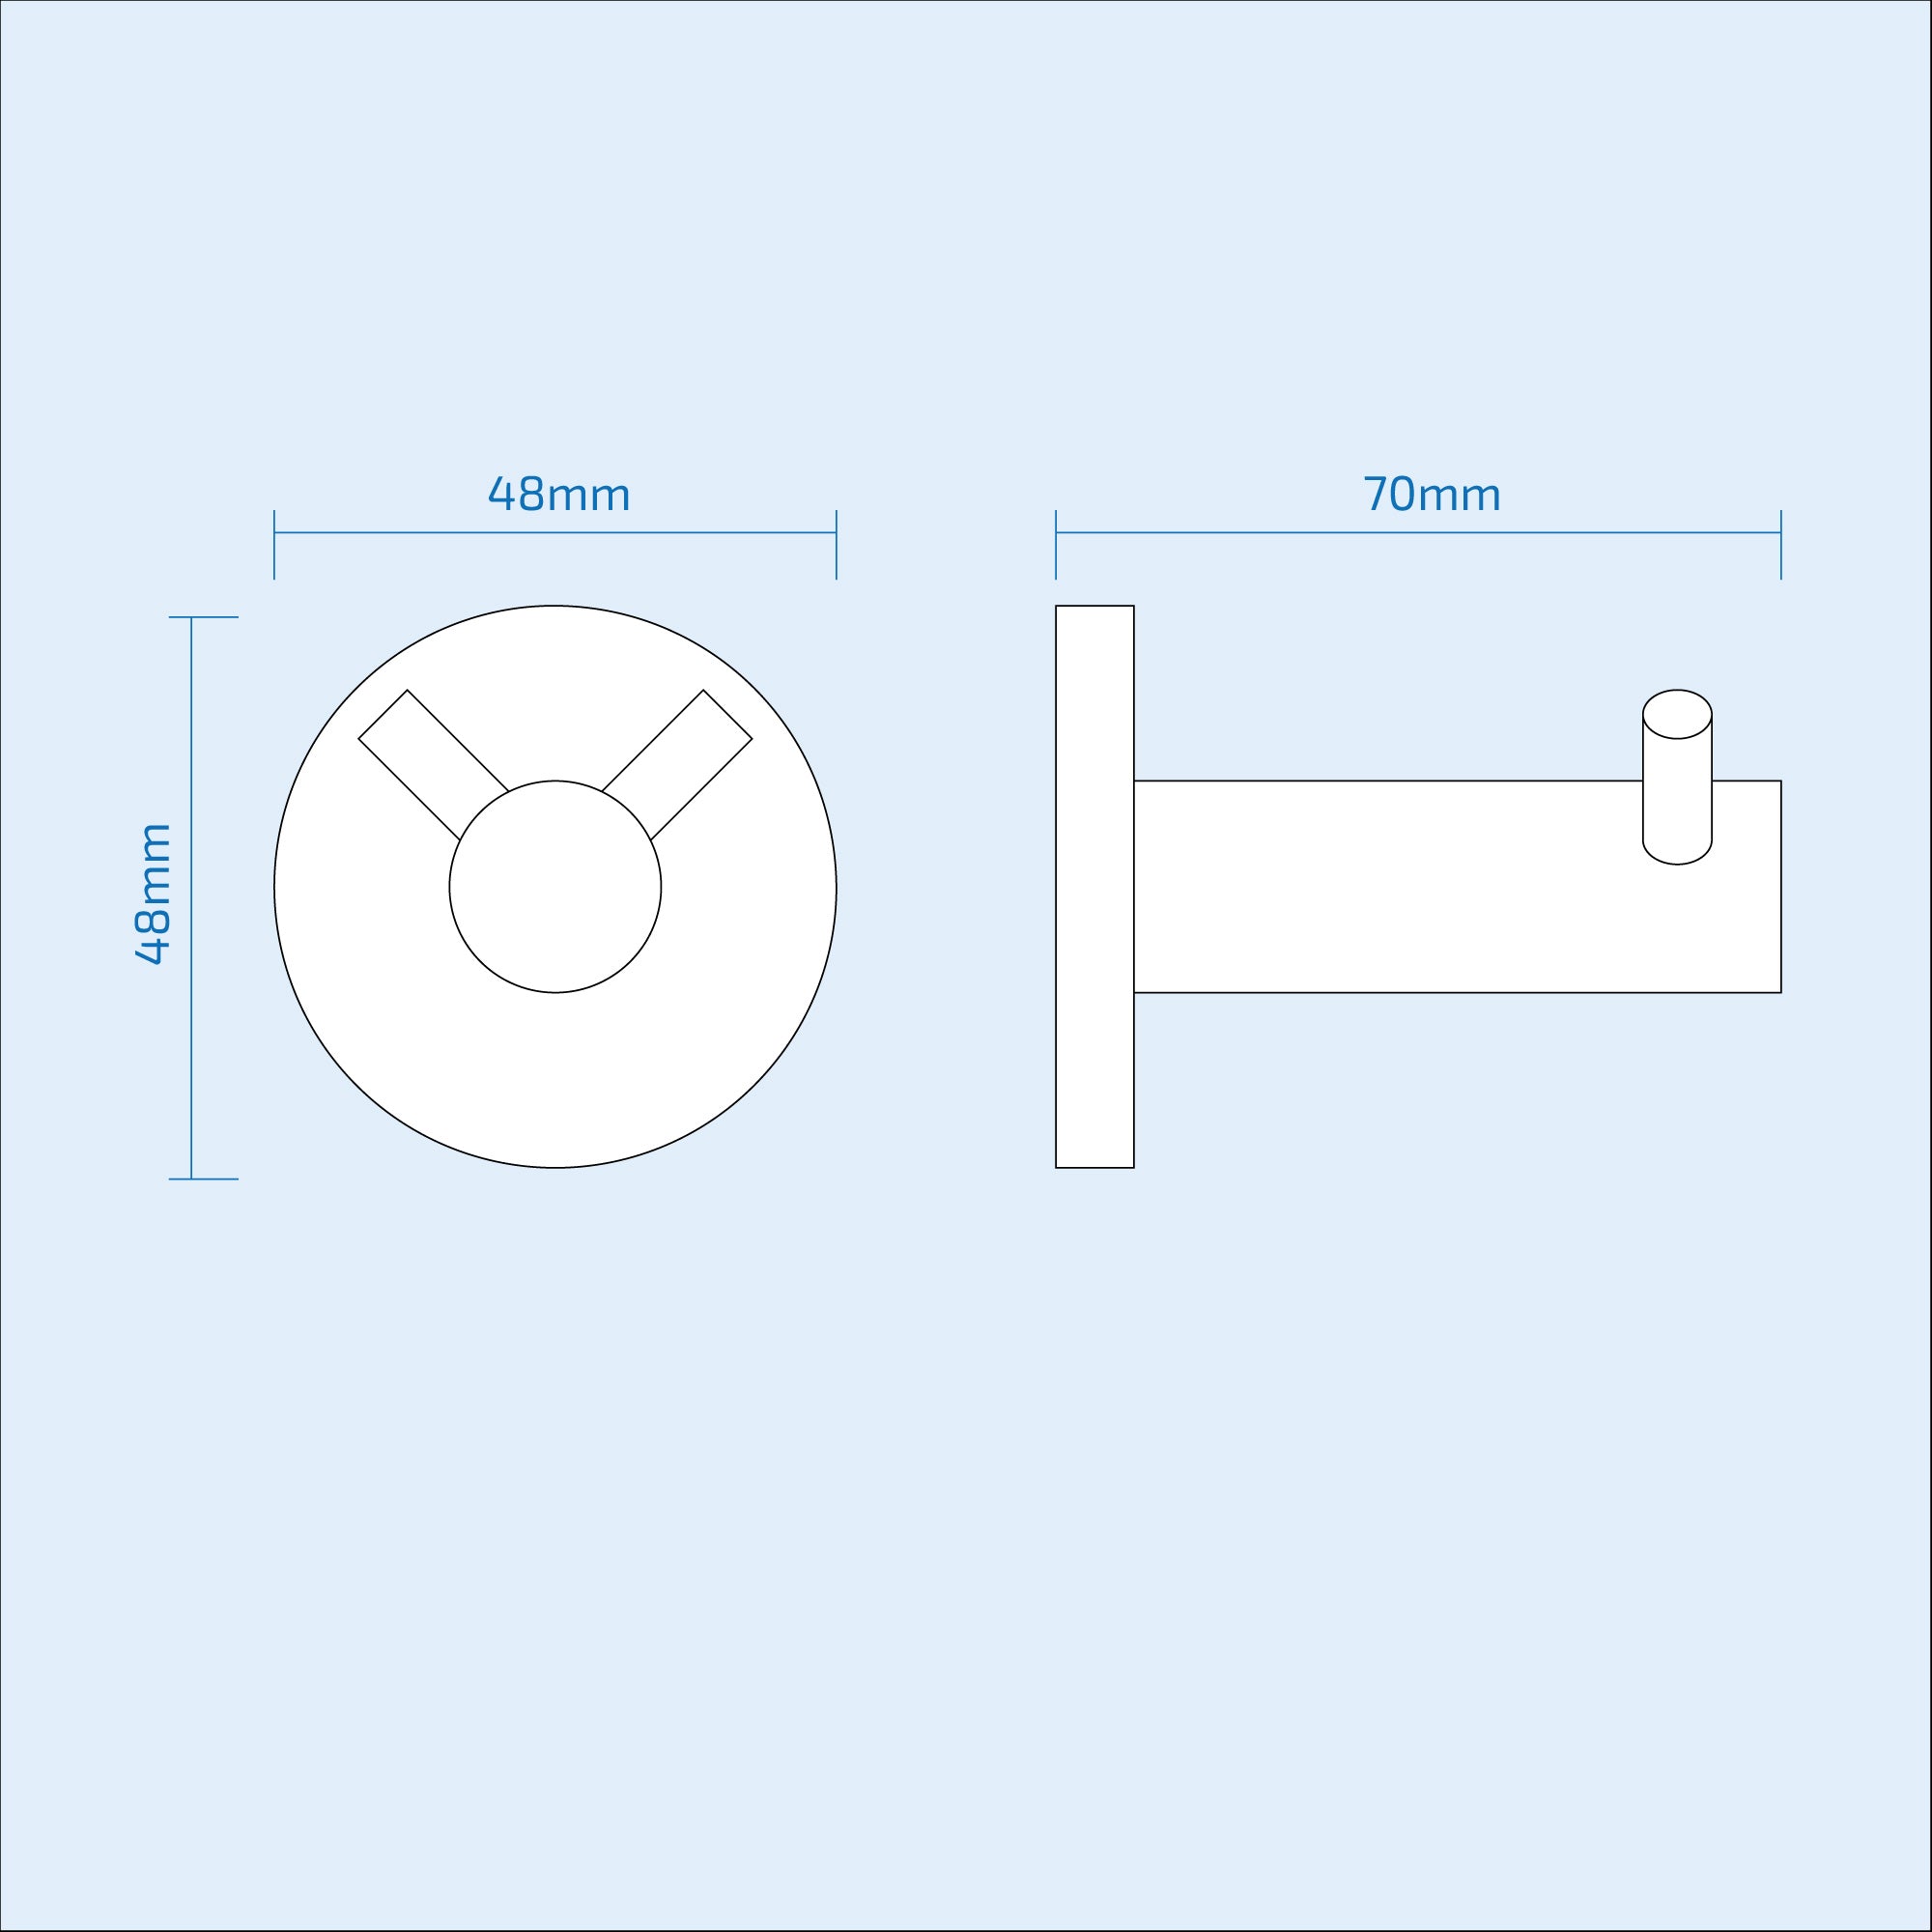 Double Robe Hook Chrome Round 70mm